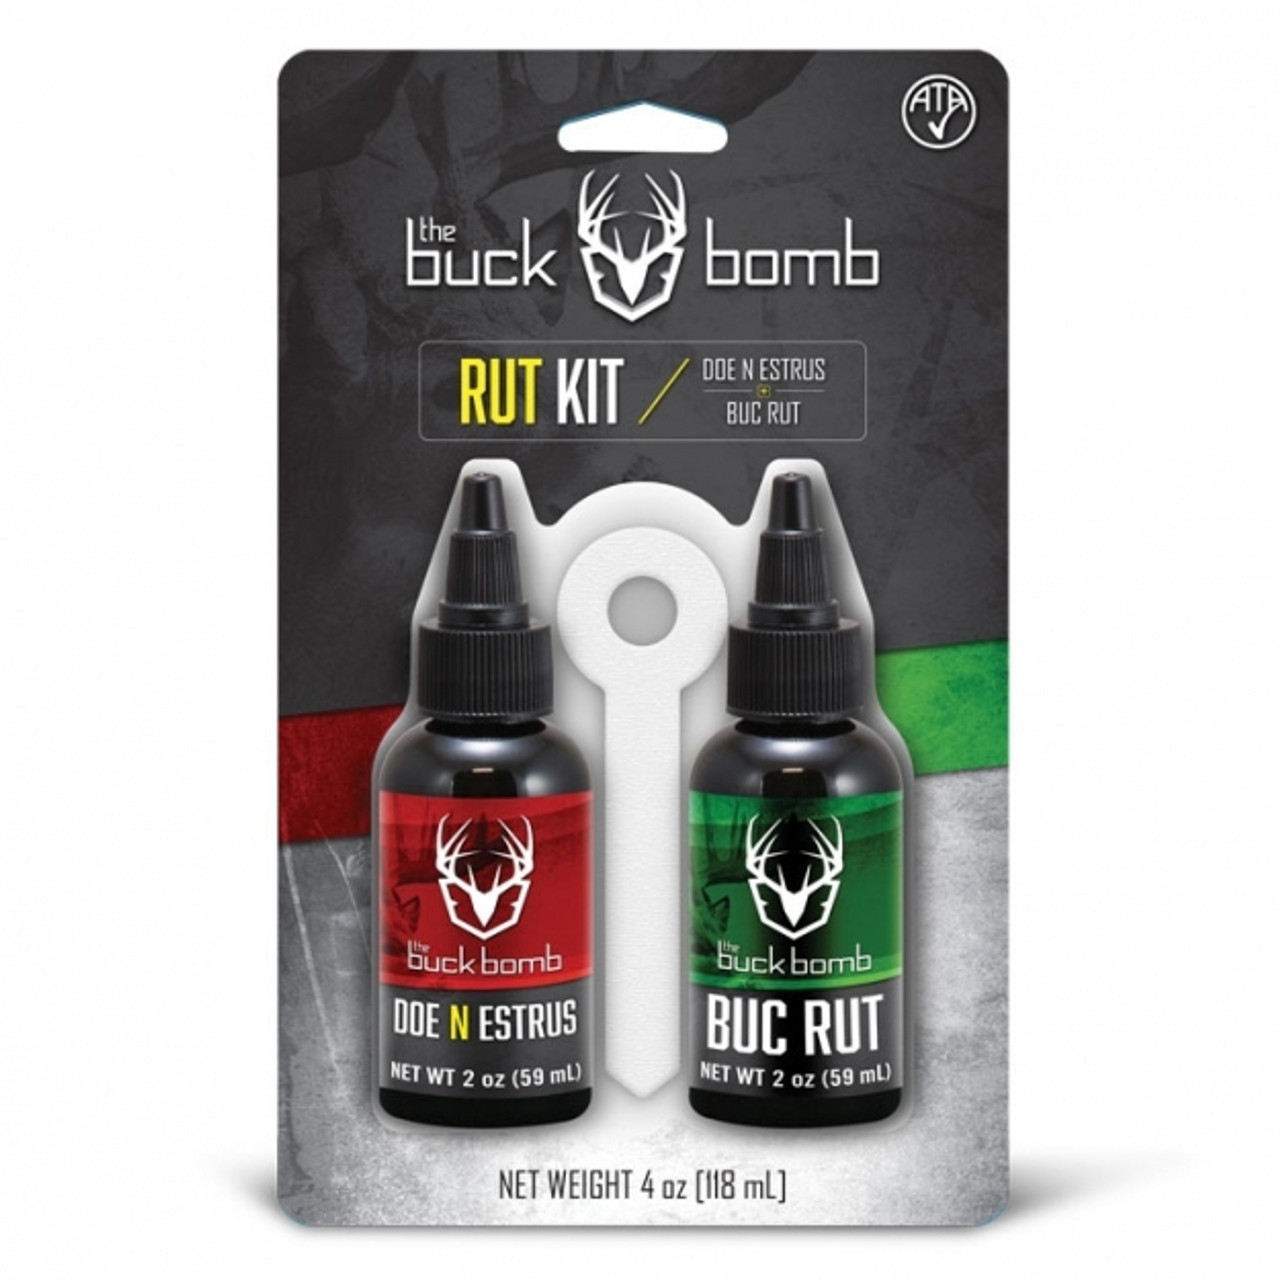 The Buck Bomb Rut Kit includes both the 2oz Doe ‘N Estrus as well as the 2oz BucRut scent, a classic and effective combination for use during the rut. Doe ‘N Estrus is urine drawn from an estrus whitetail doe, while BucRut is urine collected from a whitetail buck at least 3.5 years of age.

Use with the included 4 spike wicks near your treestand, in front of trail cameras and/or over mock scrapes to attract bucks and force them to claim their area.

Features:

2oz Doe ‘N Estrus
2oz BucRut
Includes 4 spike wicks for use with liquid scent
Use near a treestand, in front of trail cameras and/or over mock scrapes